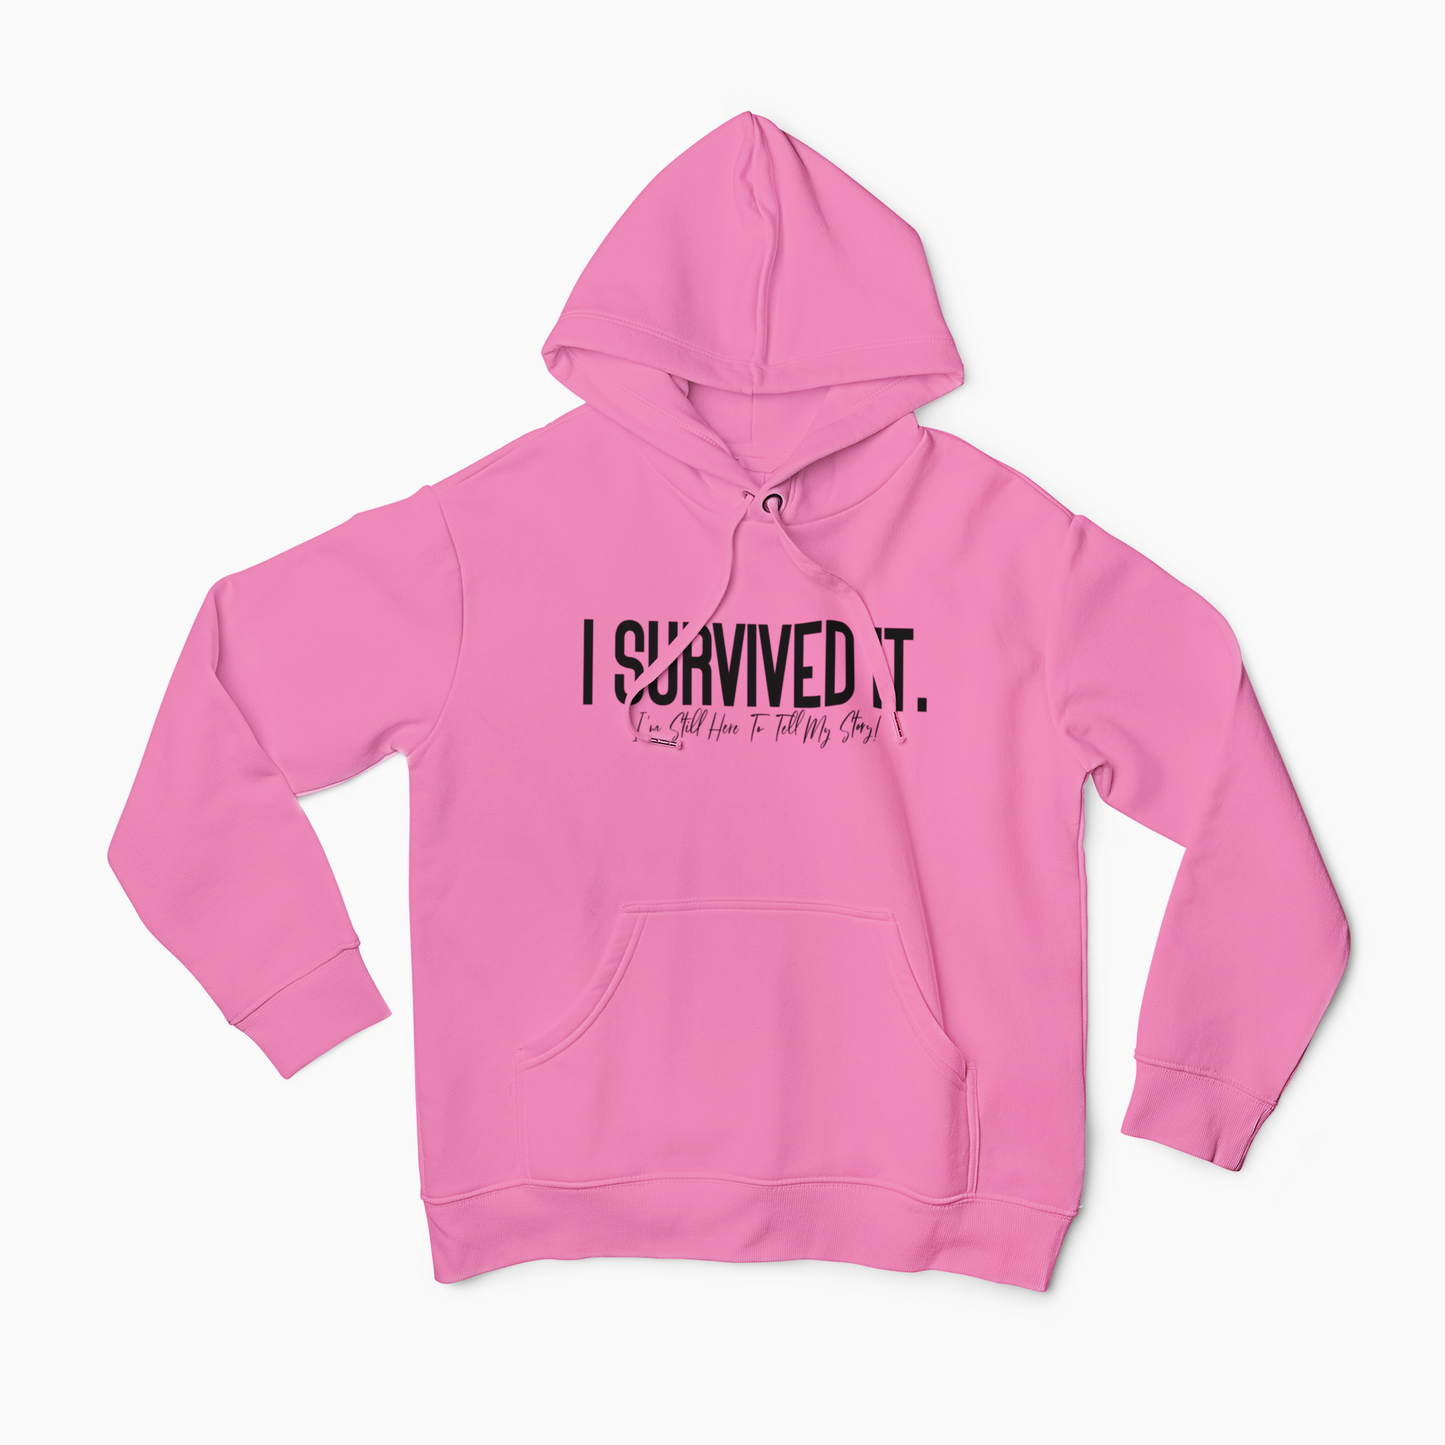 Shop for our I Survived It Graphic Christian Statement hoodie. This pink unisex statement hoodie is soft and very comfortable so you can wear it everyday. This faith based apparel will certainly spark up a conversation about your faith.